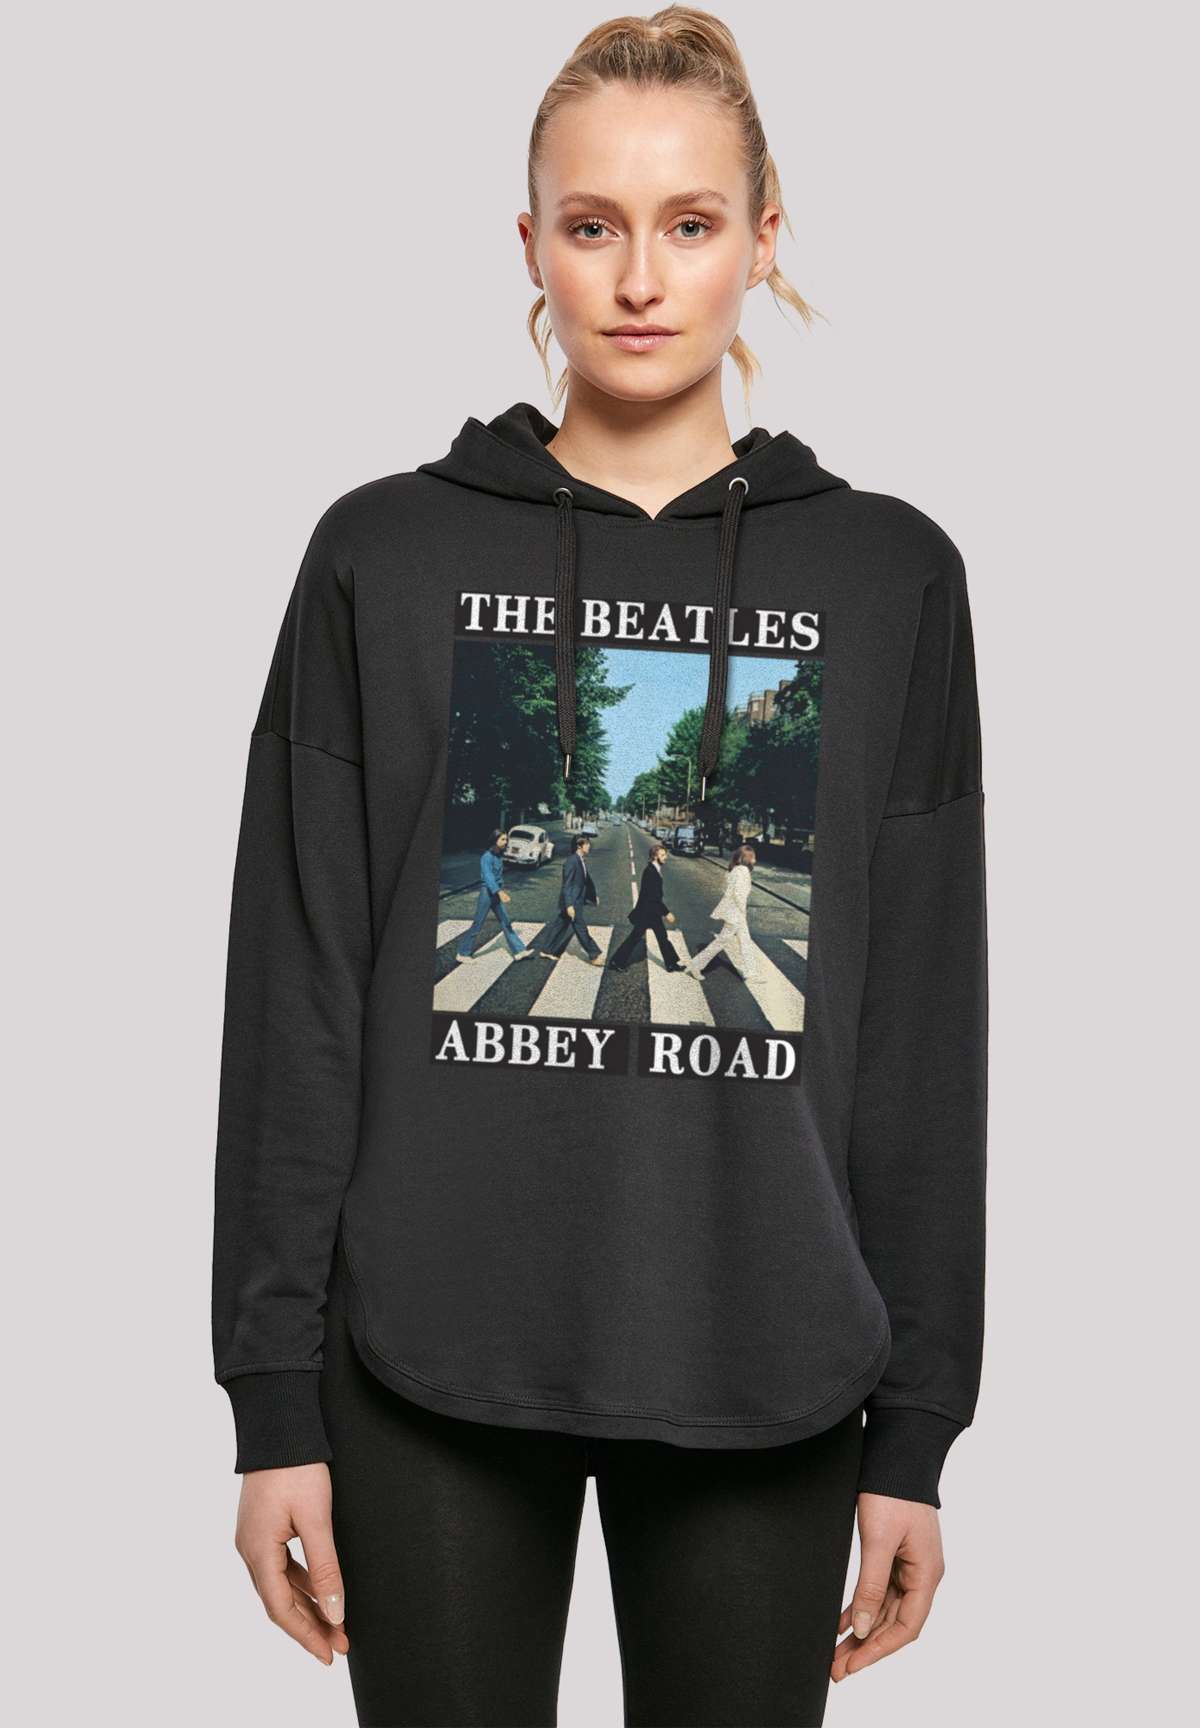 Пуловер THE BEATLES BAND ABBEY ROAD